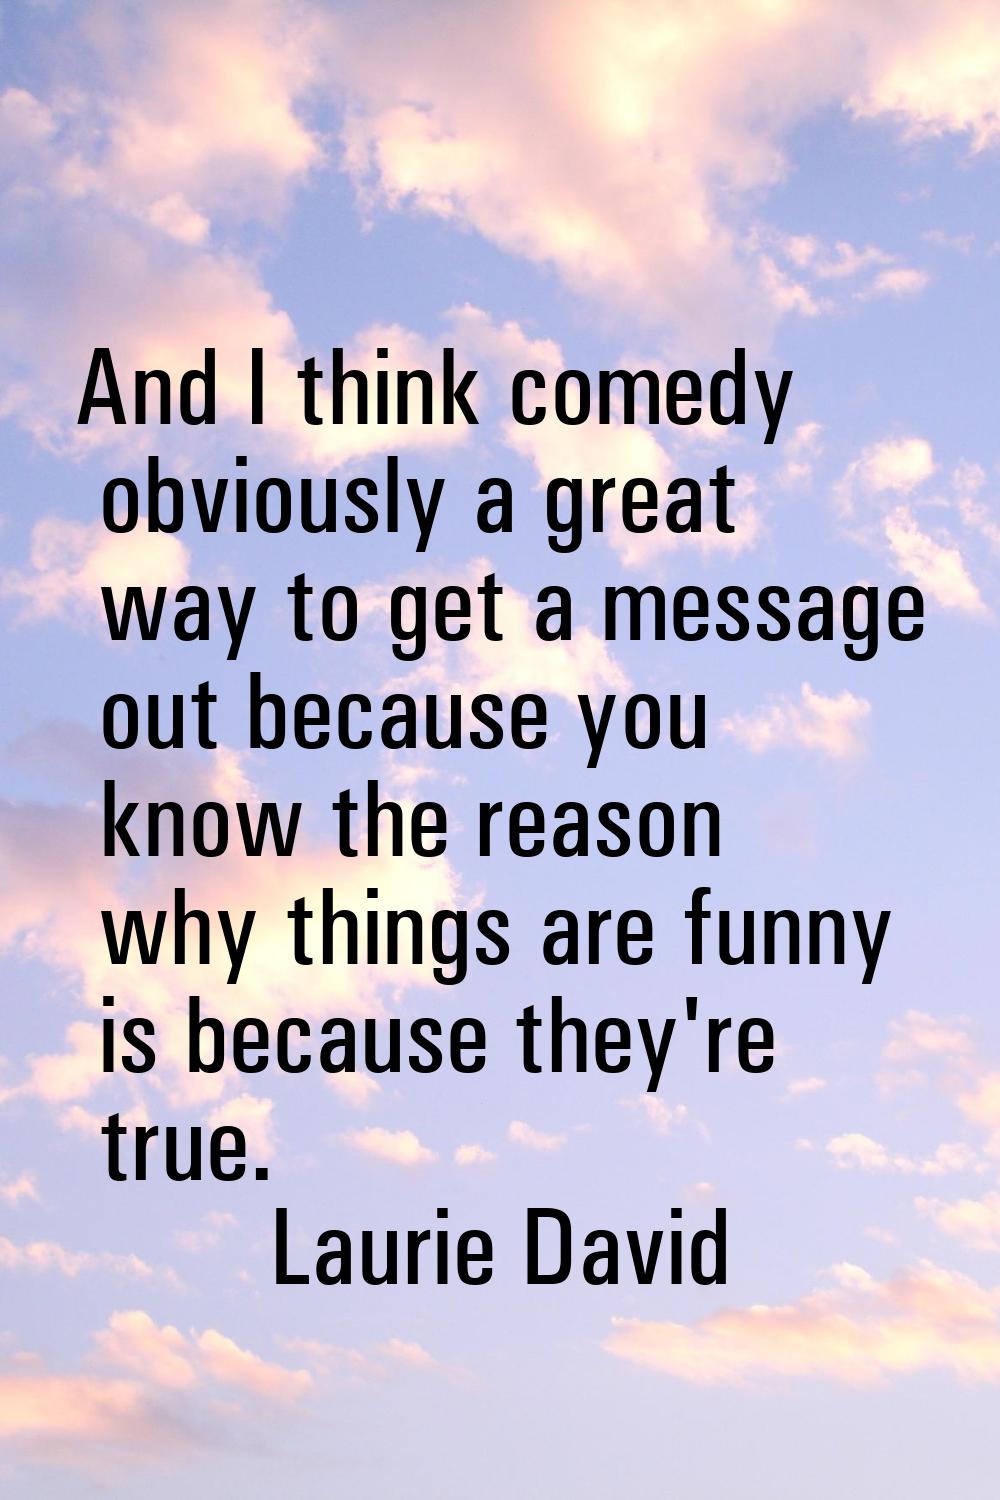 And I think comedy obviously a great way to get a message out because you know the reason why thing